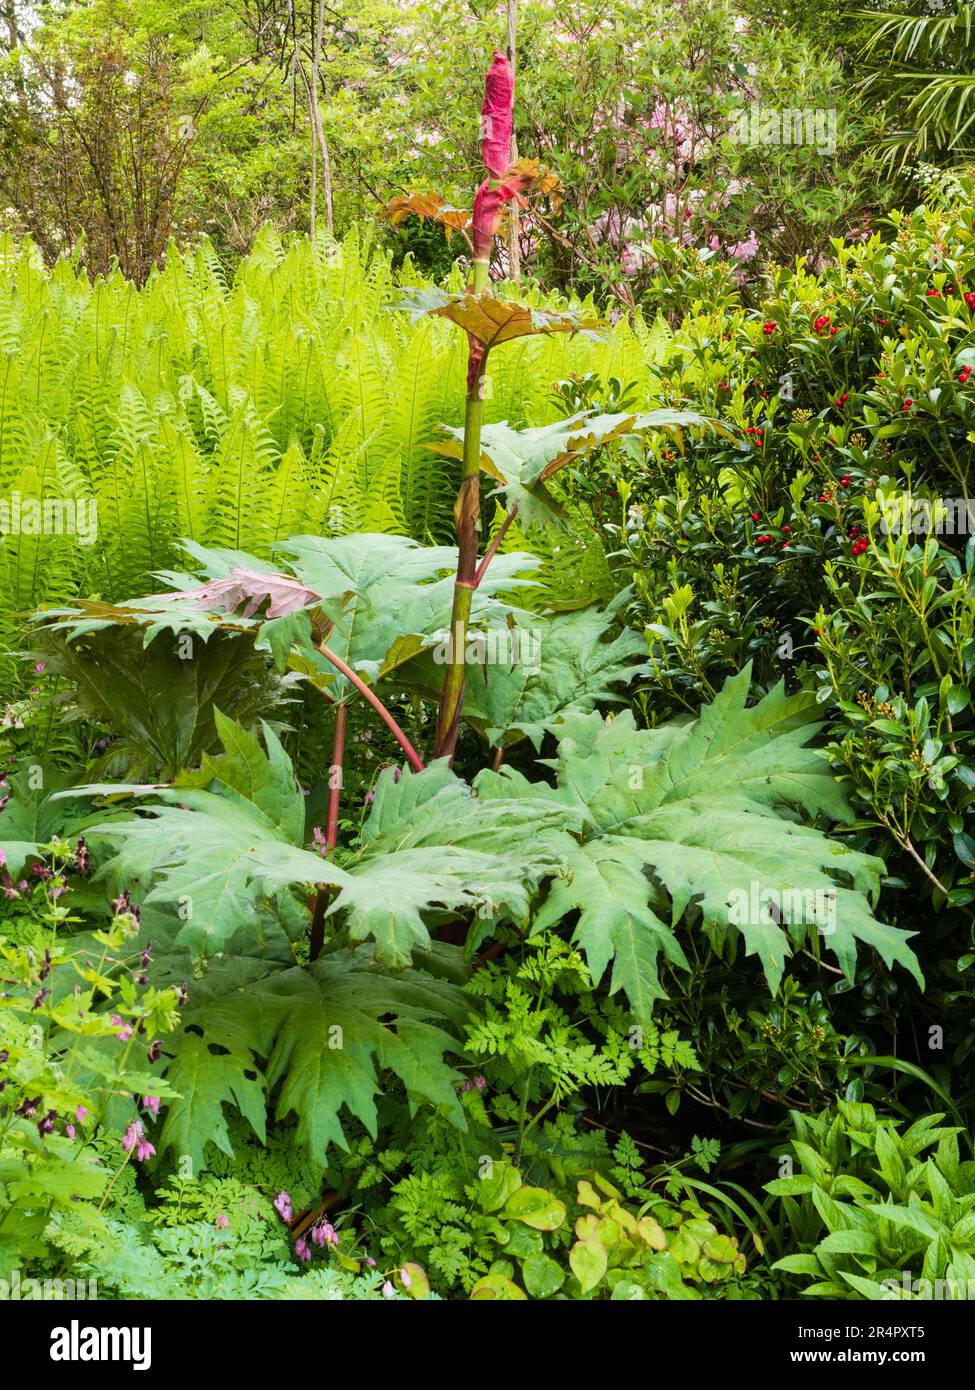 Red flower stem of the giant ornamental rhubarb, Rheum palmatum, emerges in front of a stand of Matteucica struthiopteris, ostrich fern Stock Photo